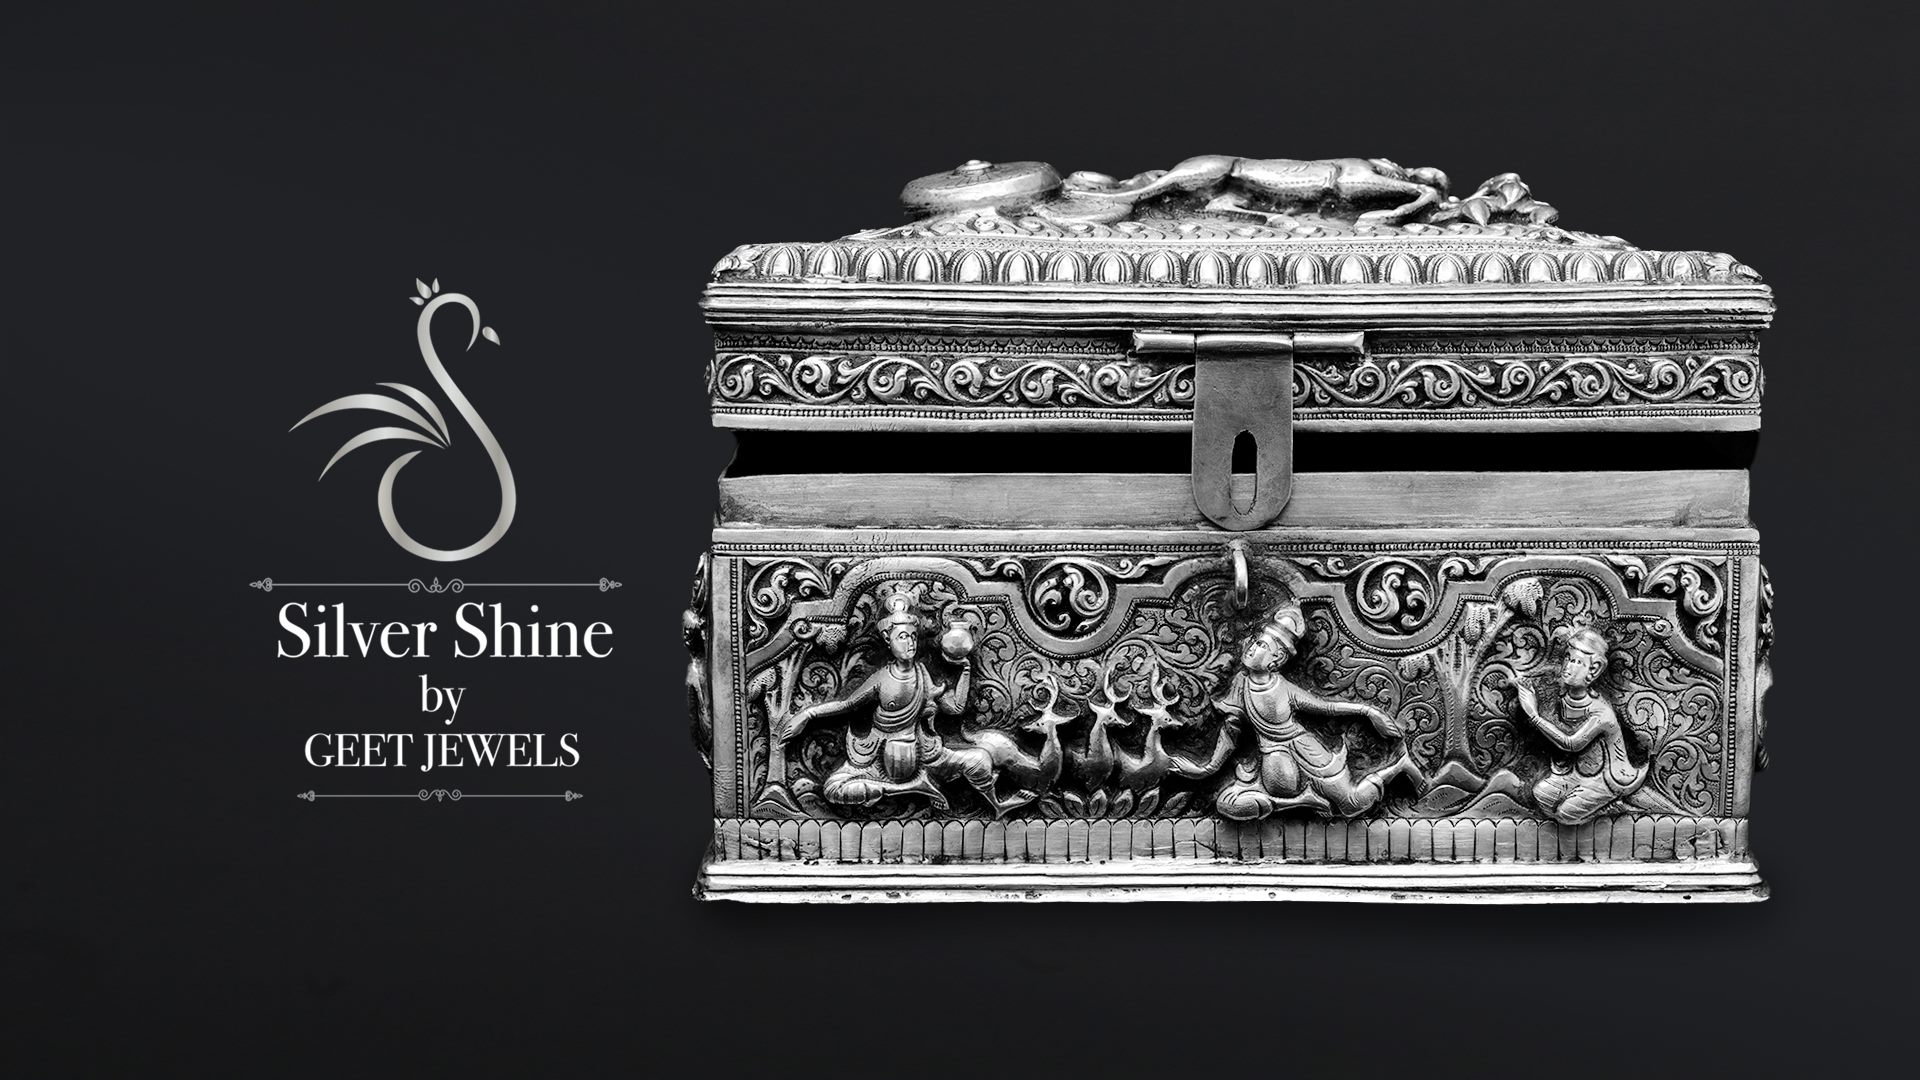 silver shine box by geet jewels